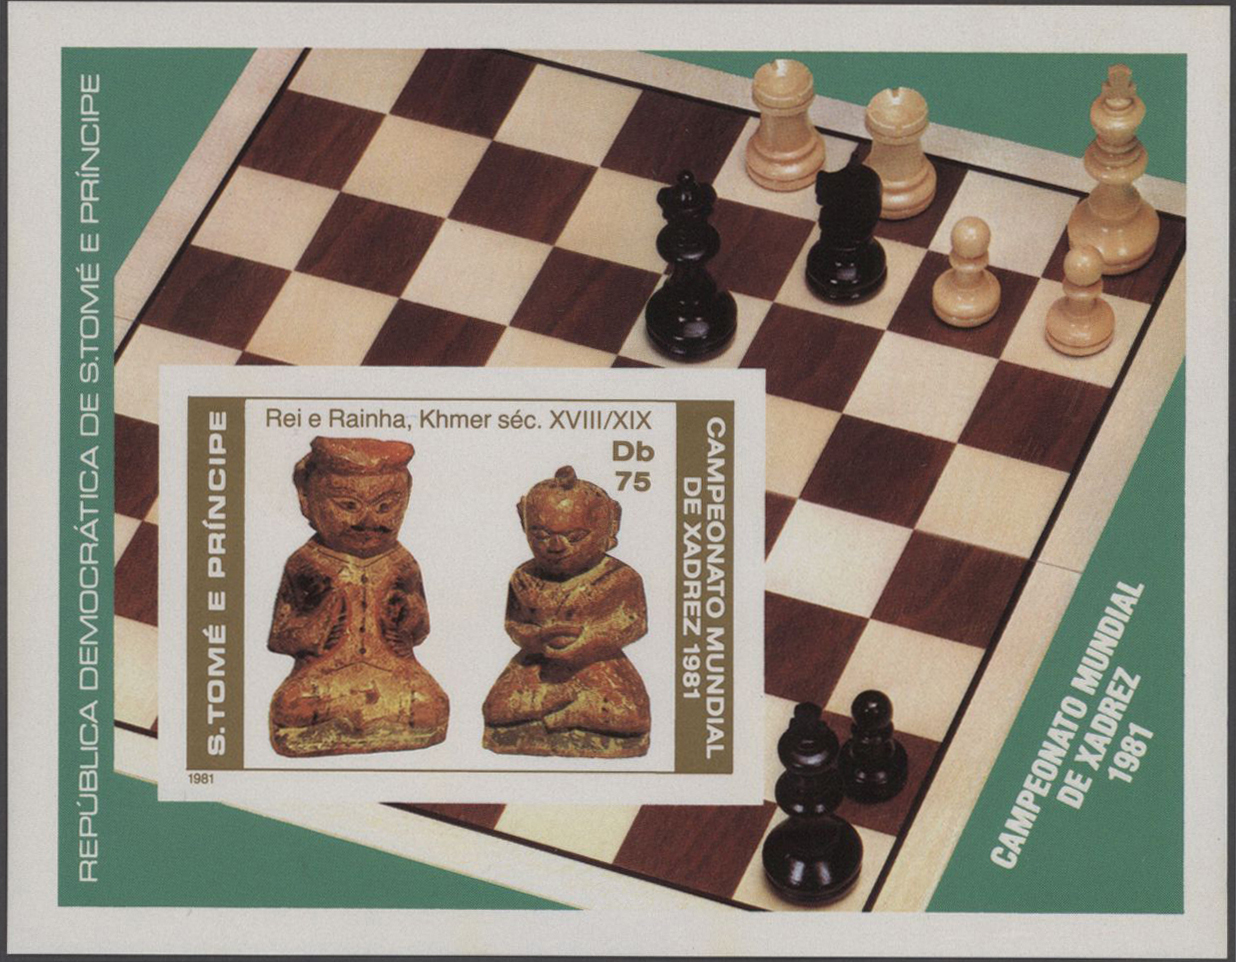 Lot 08548 - thematik: spiele-schach / games-chess  -  Auktionshaus Christoph Gärtner GmbH & Co. KG 55th AUCTION - Day 4